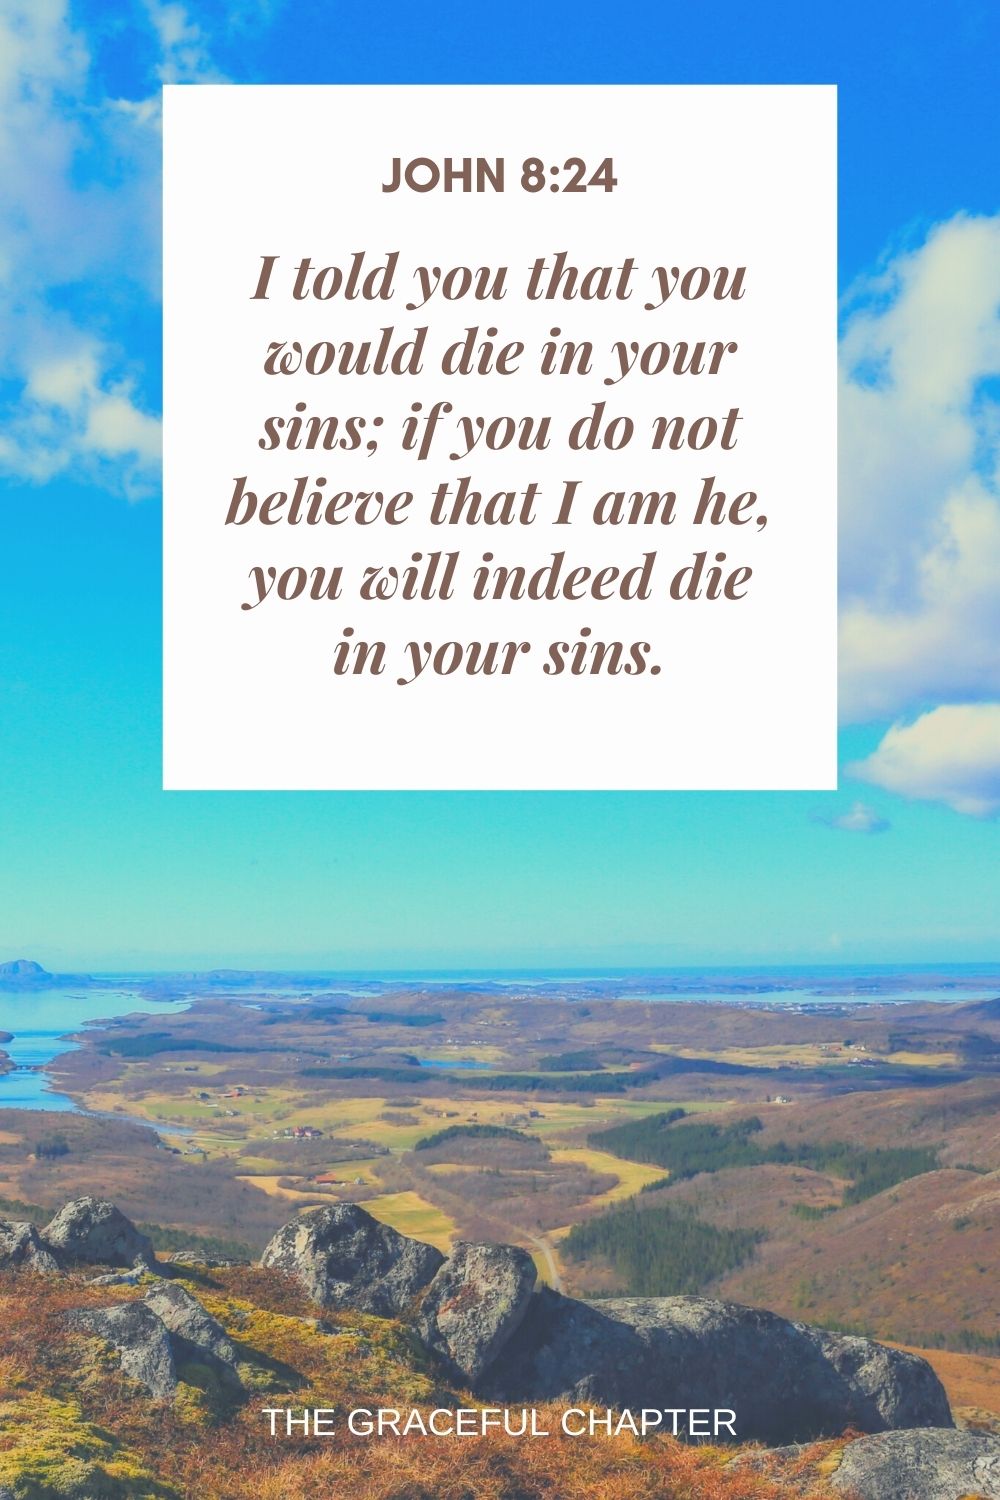 I told you that you would die in your sins; if you do not believe that I am he, you will indeed die in your sins. John 8:24